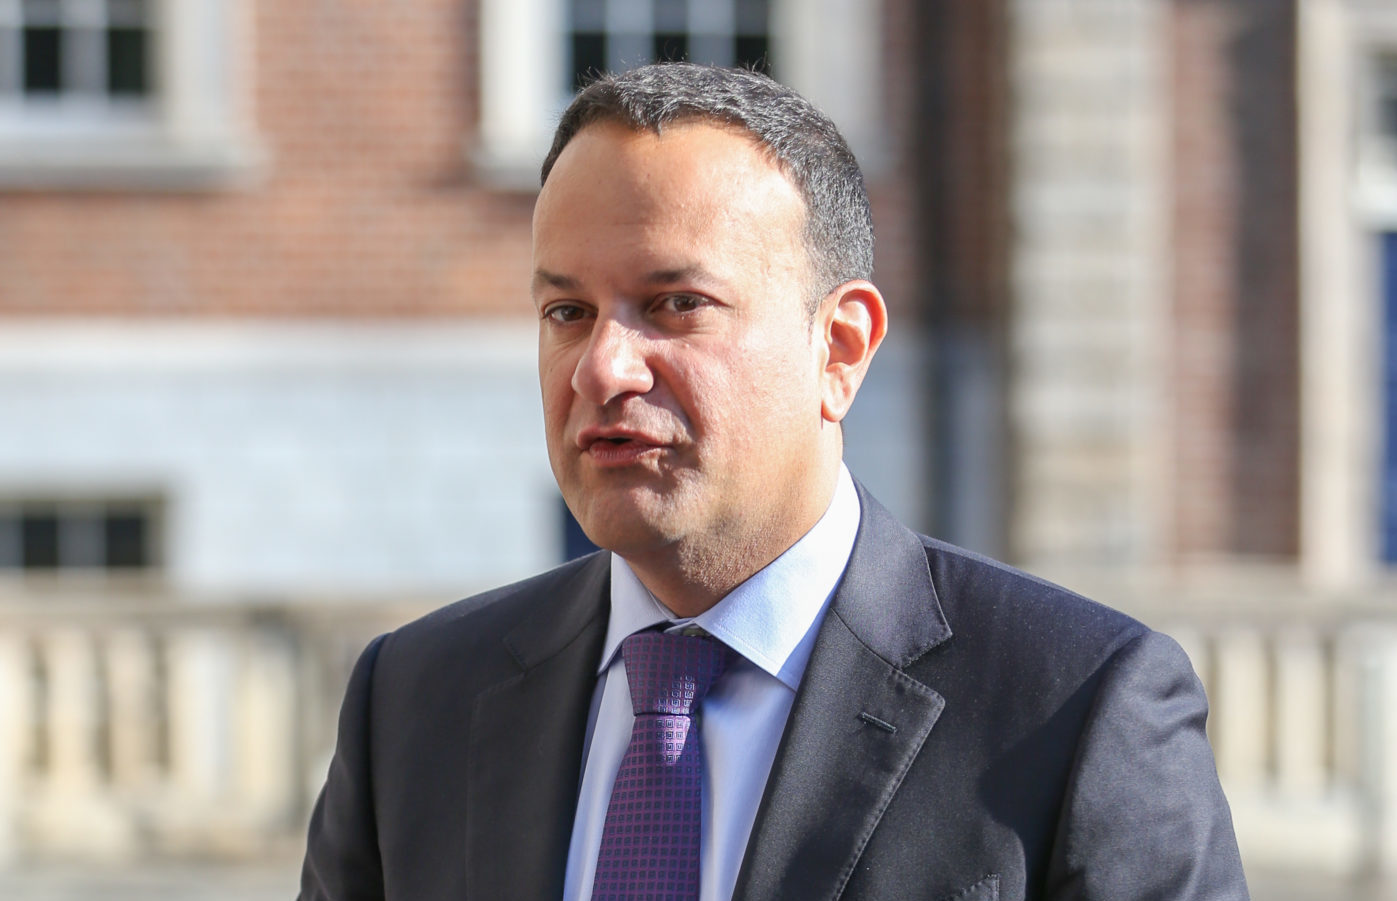 Tánaiste Leo Varadkar speaking to the media while arriving at Dublin Castle for a Cabinet meeting.